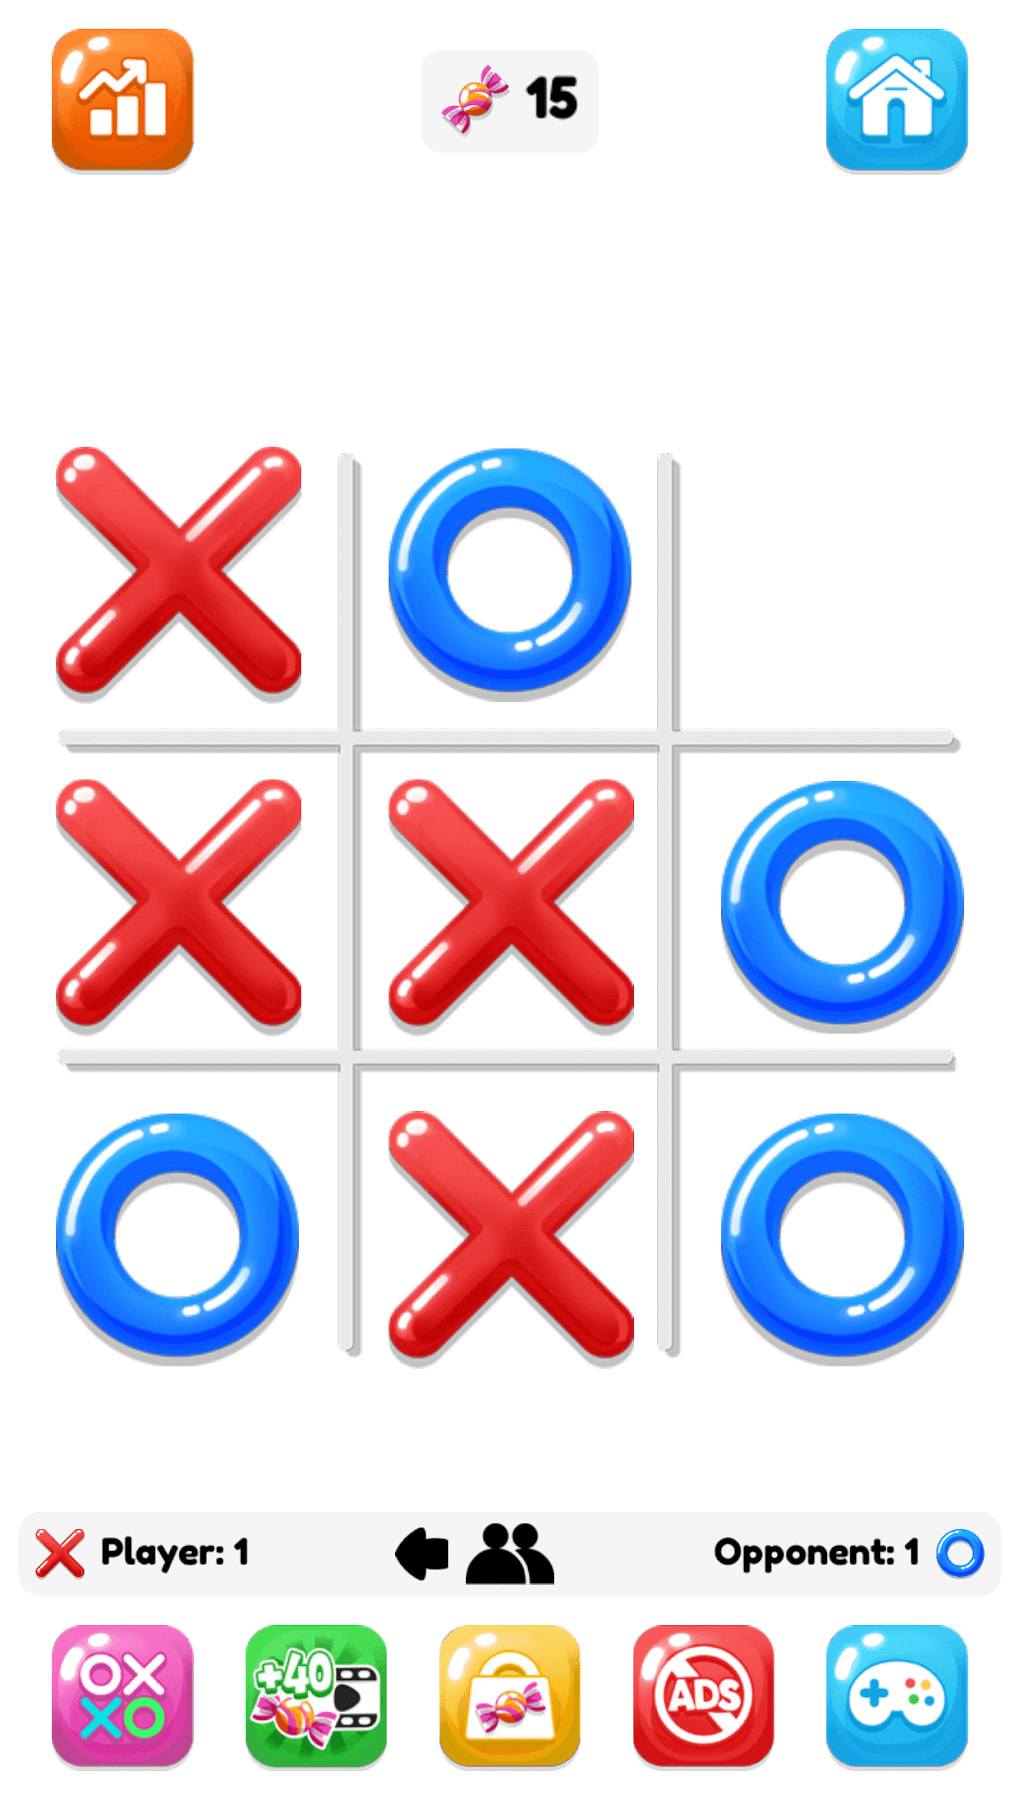 Google Has Rolled Out New Solitaire And Tic-Tack-Toe Games